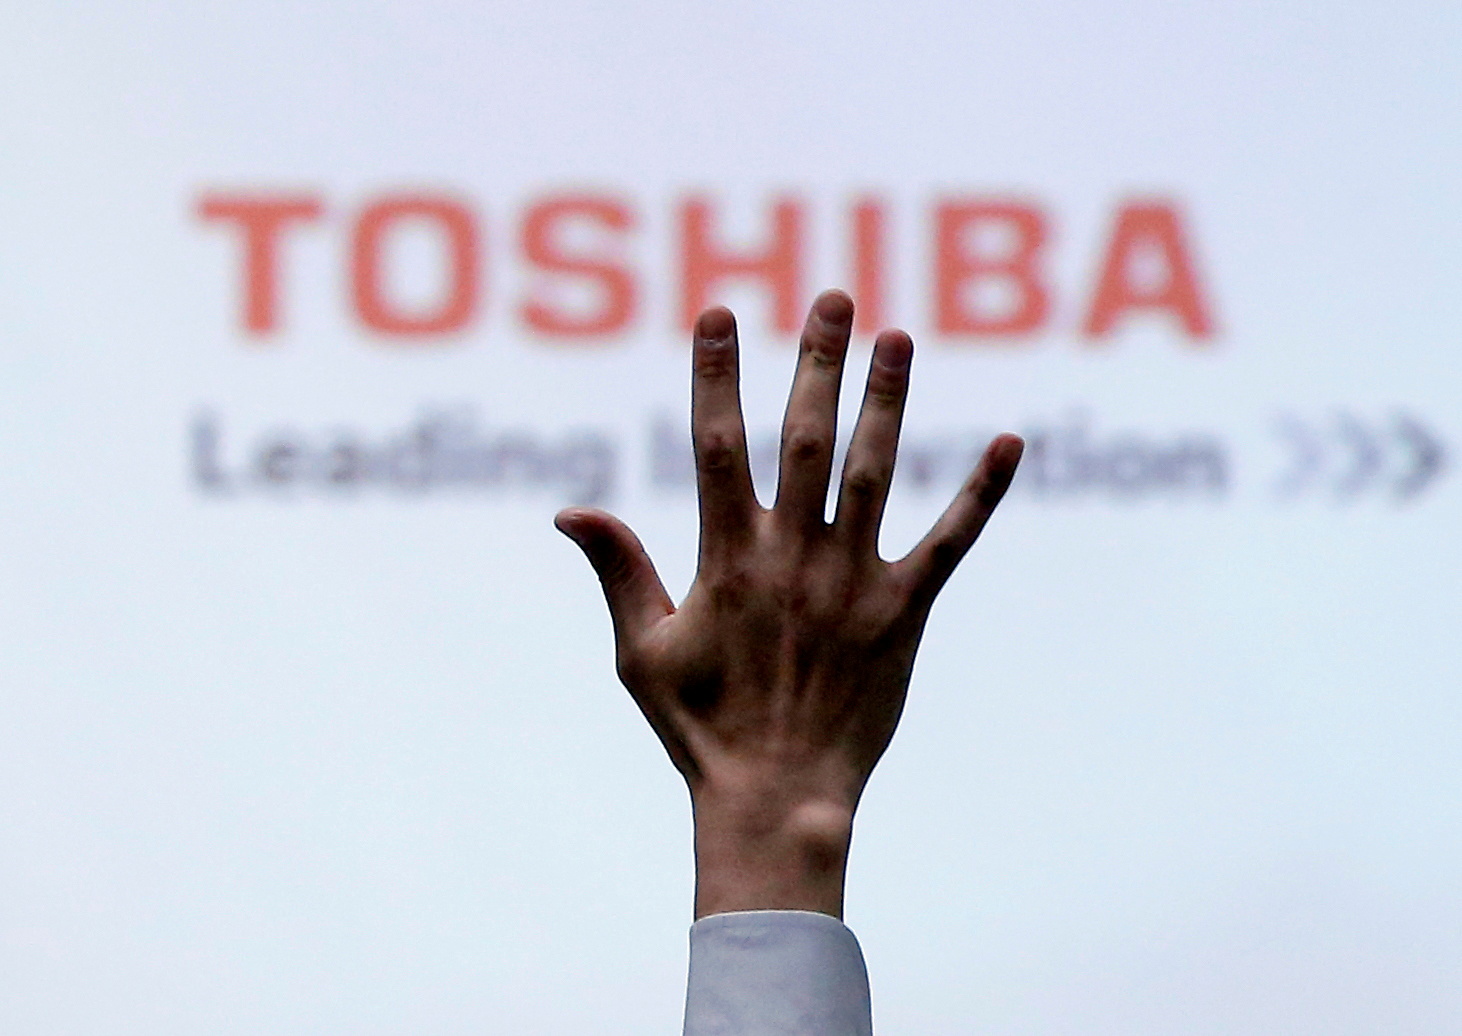 A reporter raises his hand for a question during a news conference by Toshiba Corp CEO Satoshi Tsunakawa at the company headquarters in Tokyo